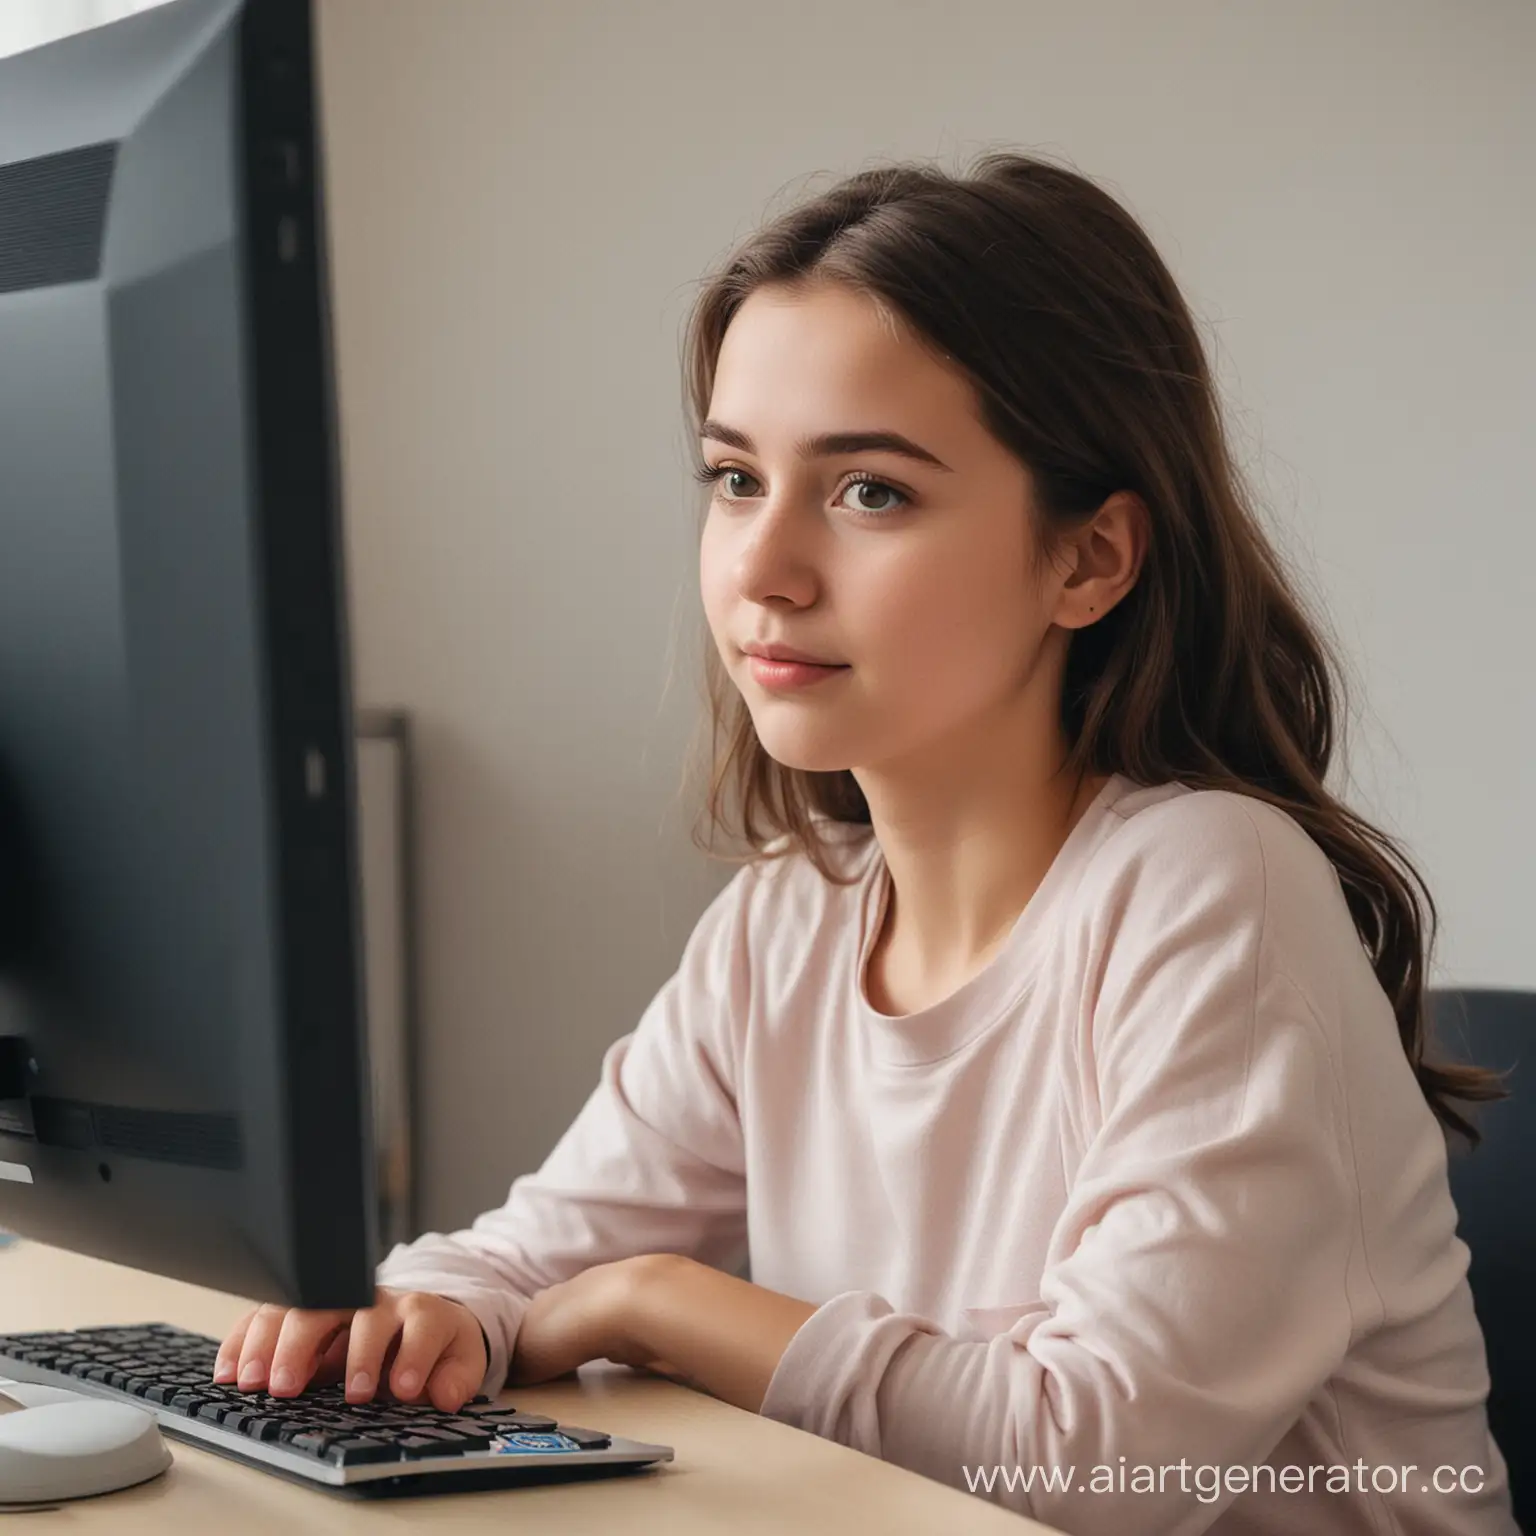 Girl-Engrossed-in-Online-Learning-on-Computer